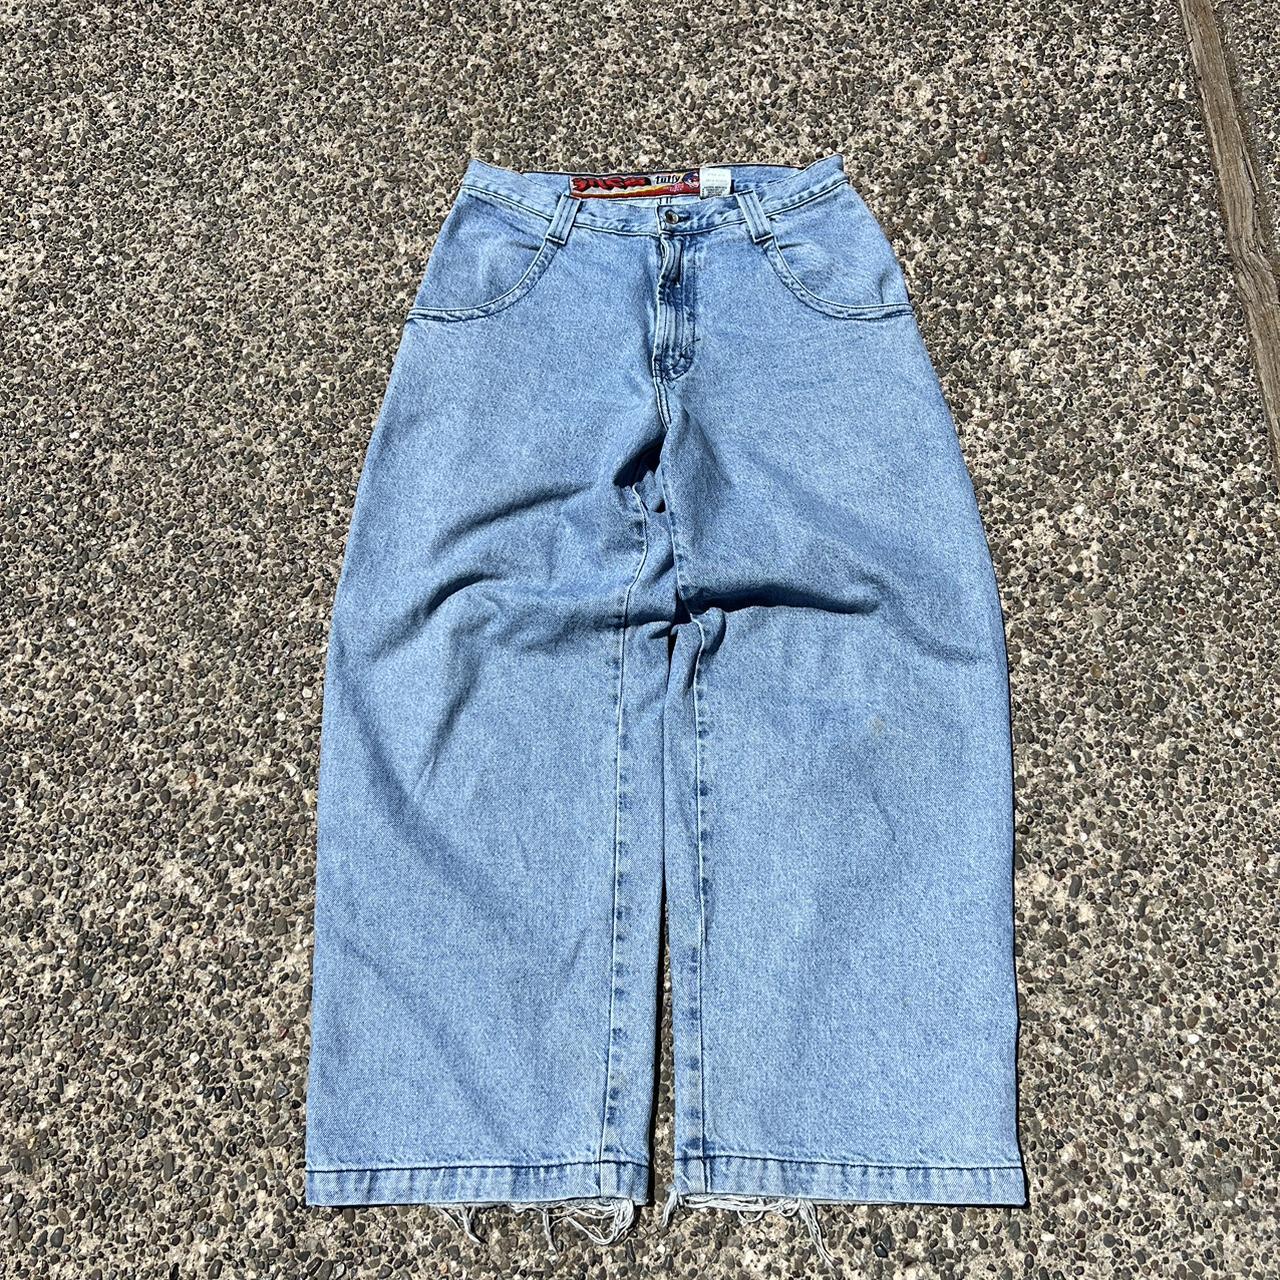 vintage 90’s JNCO tuffy these are grails fr, and in... - Depop